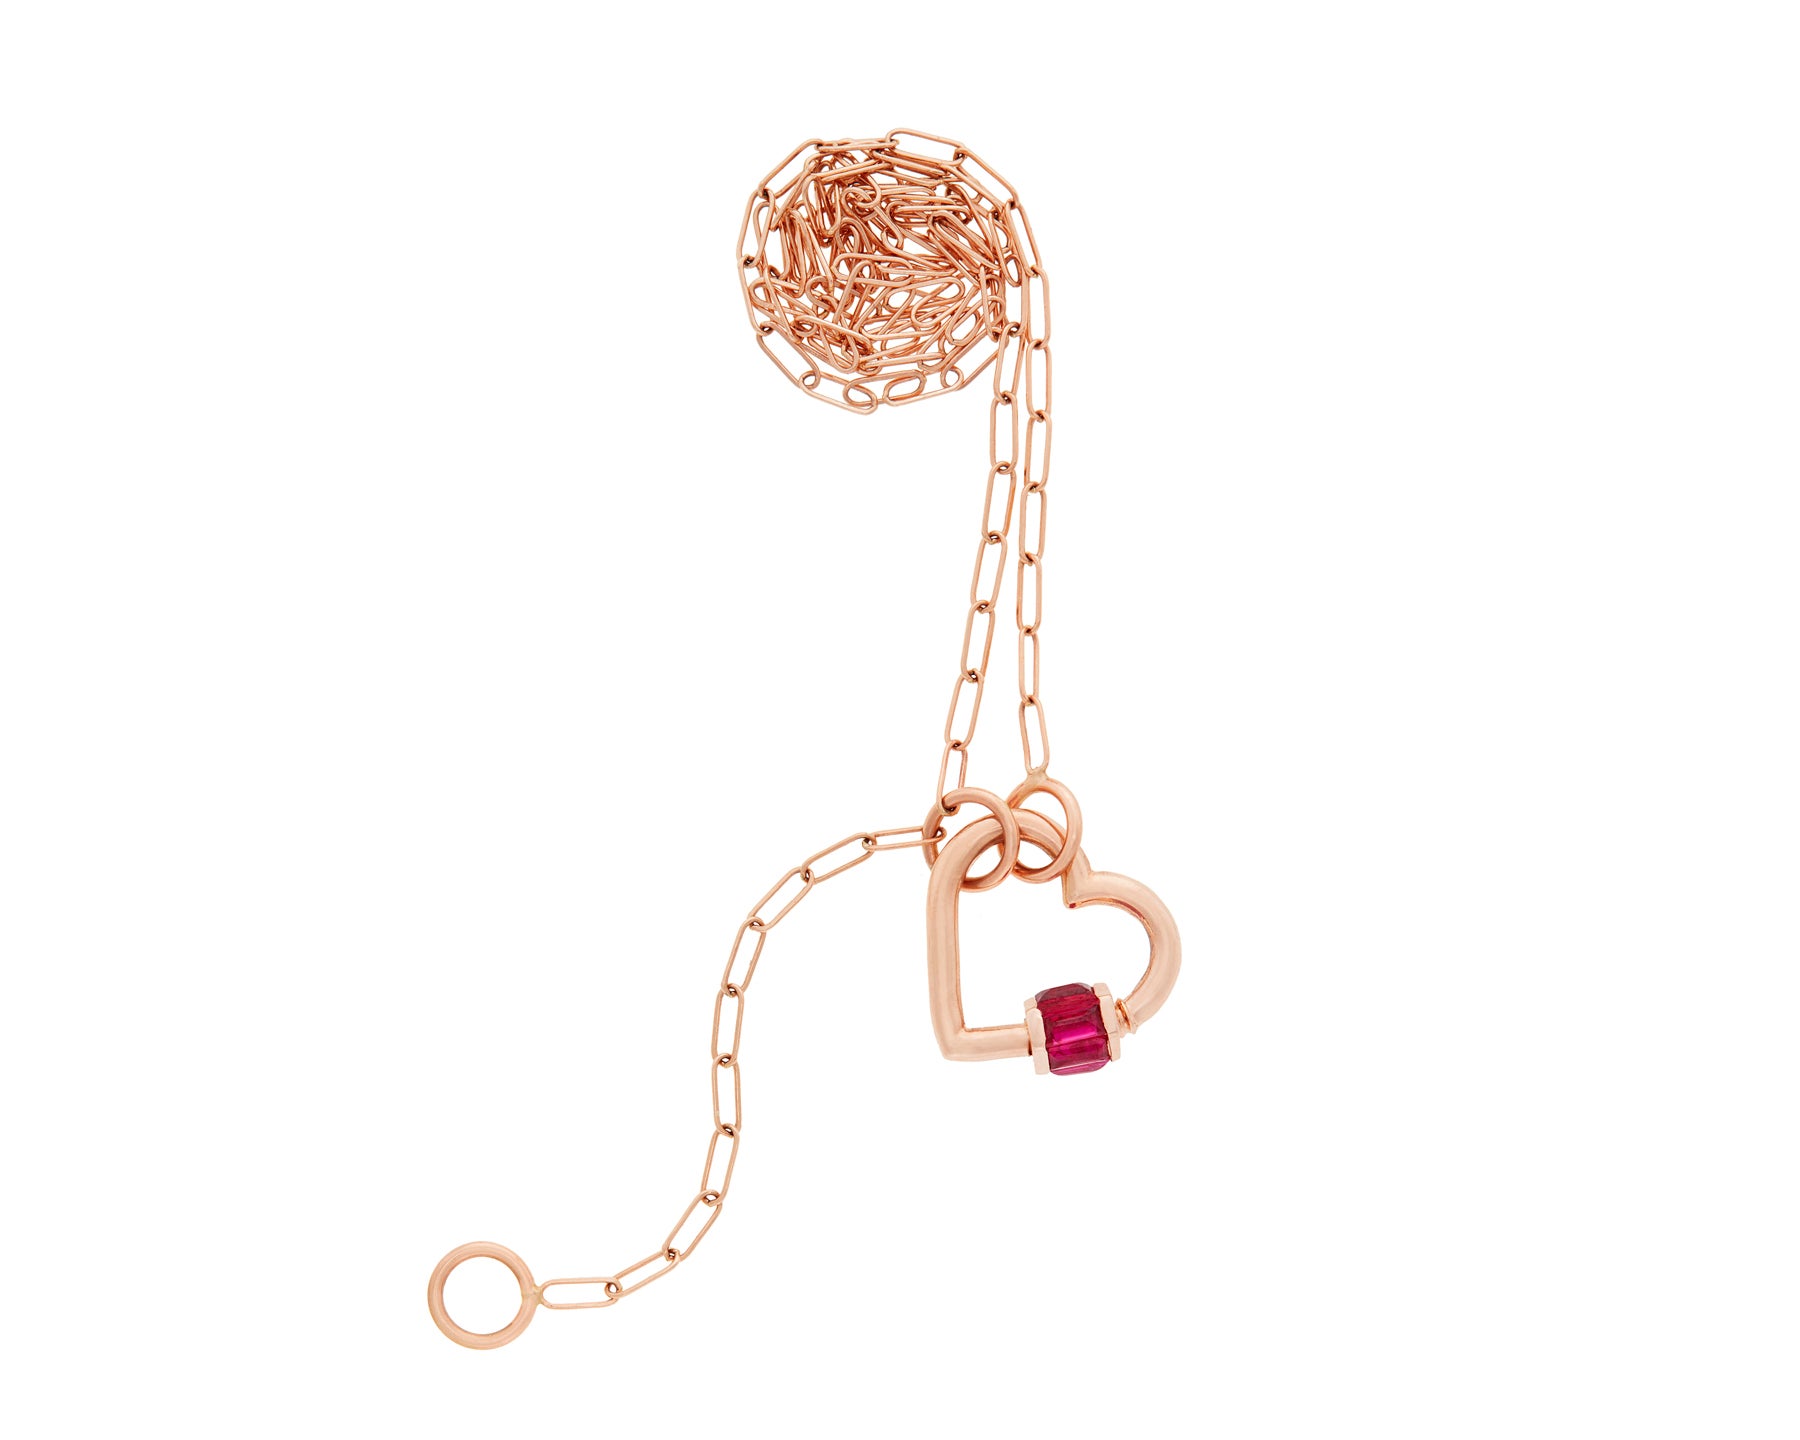 The Best Silver And Gold Gifts To Show Your Love This Valentine’s Day